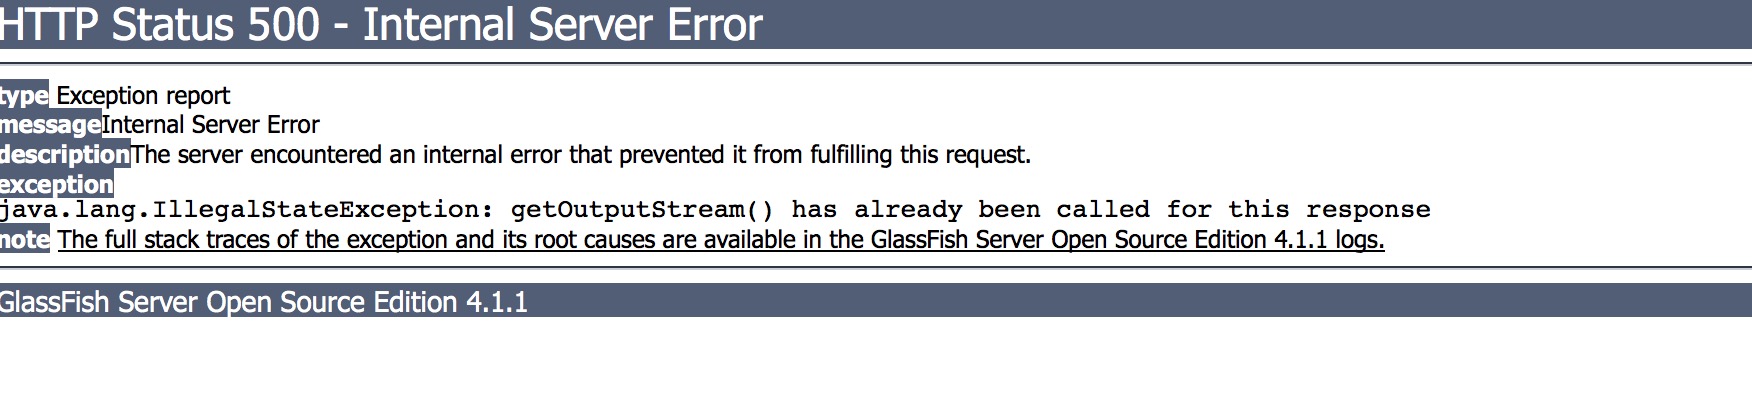 Internal error encountered. Glassfish сервер. Internal exception: javalang.illegal5tateexception: Invalid characters in username ошибка. Internal exception java lang ILLEGALSTATEEXCEPTION Invalid characters in username. Glassfish Pool.